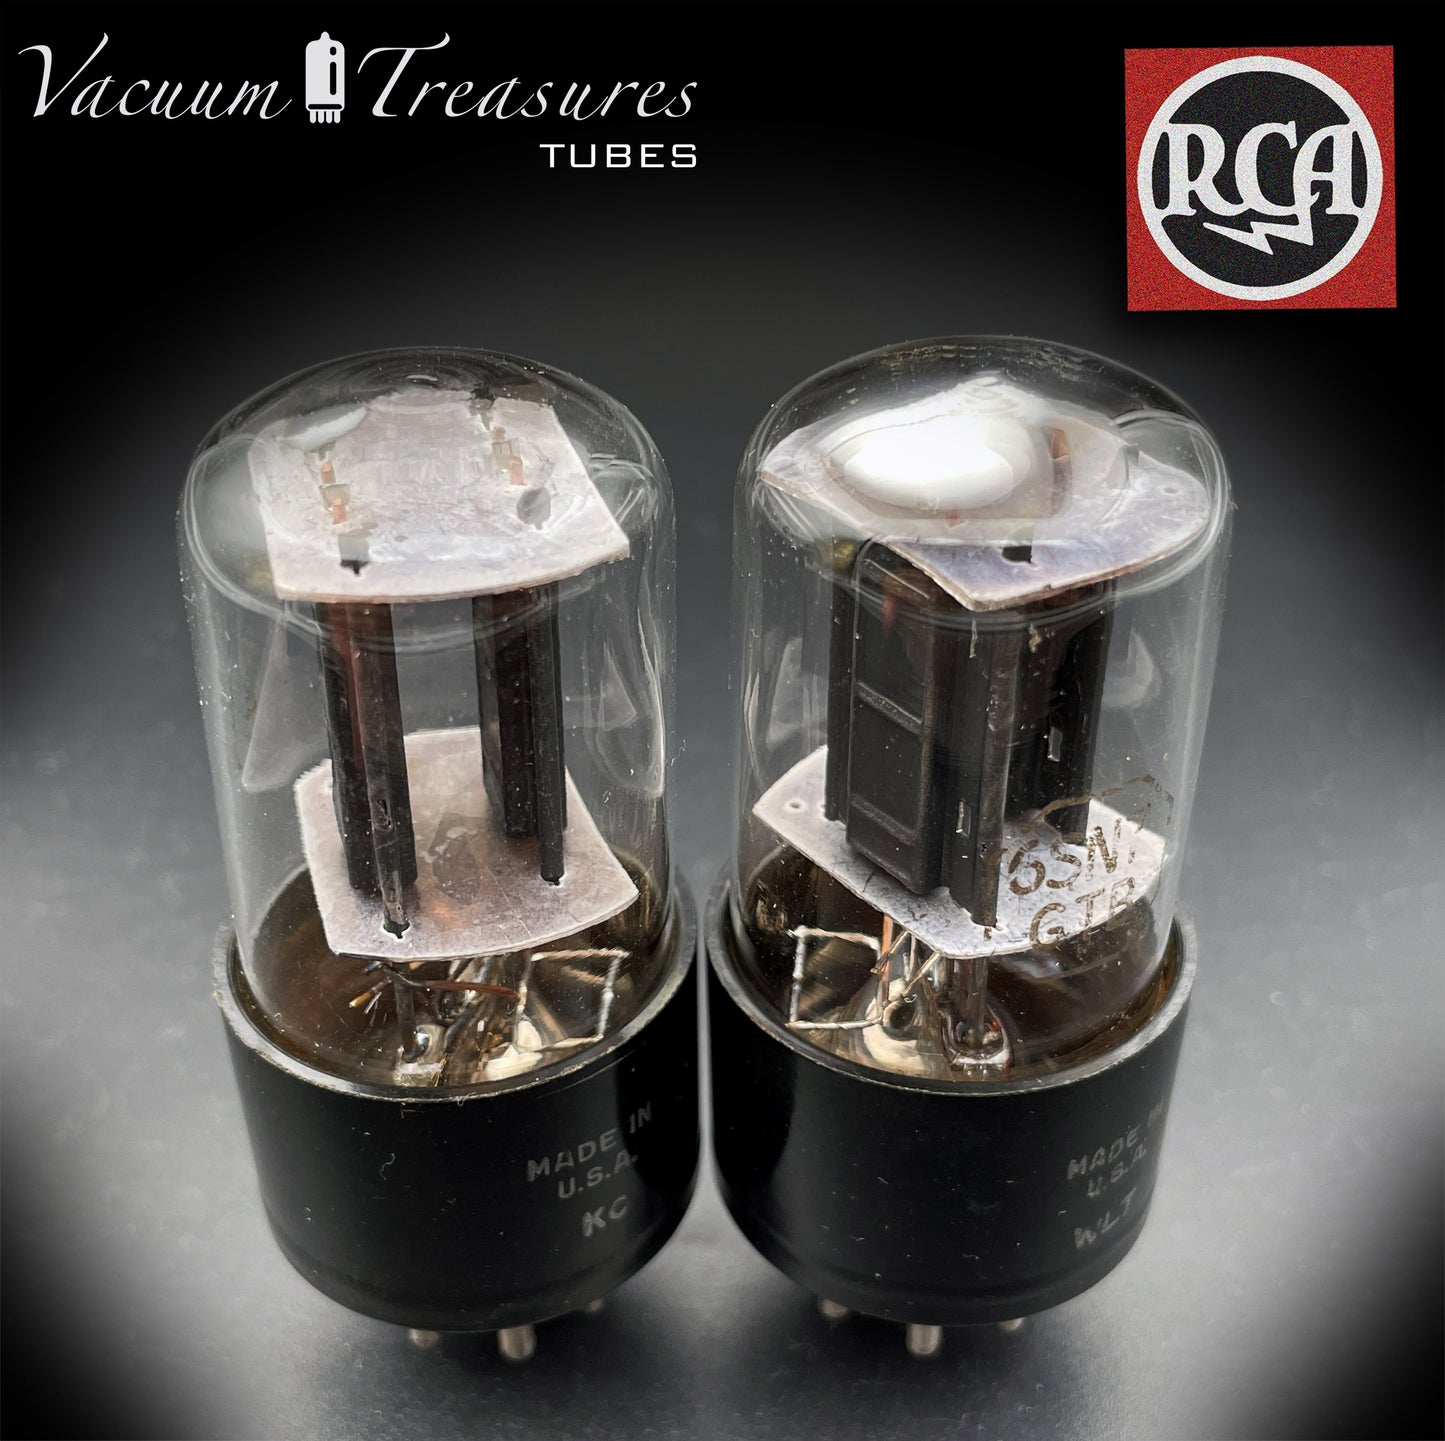 6SN7 GTB RCA Black Plates Square Getter Matched Tubes Made in USA '50s